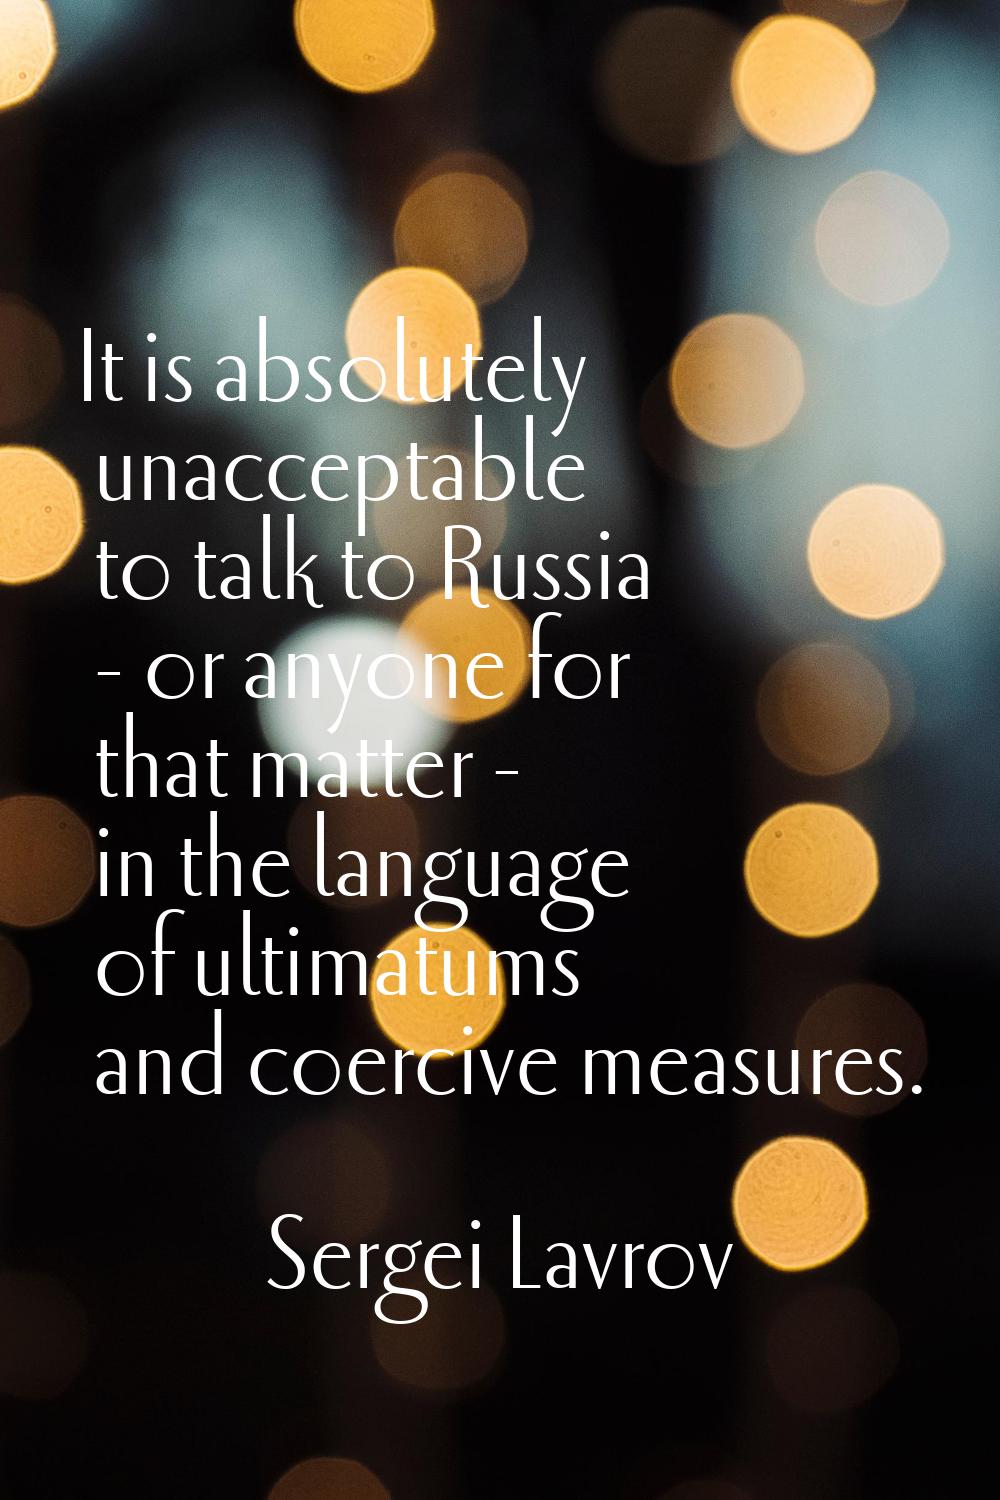 It is absolutely unacceptable to talk to Russia - or anyone for that matter - in the language of ul